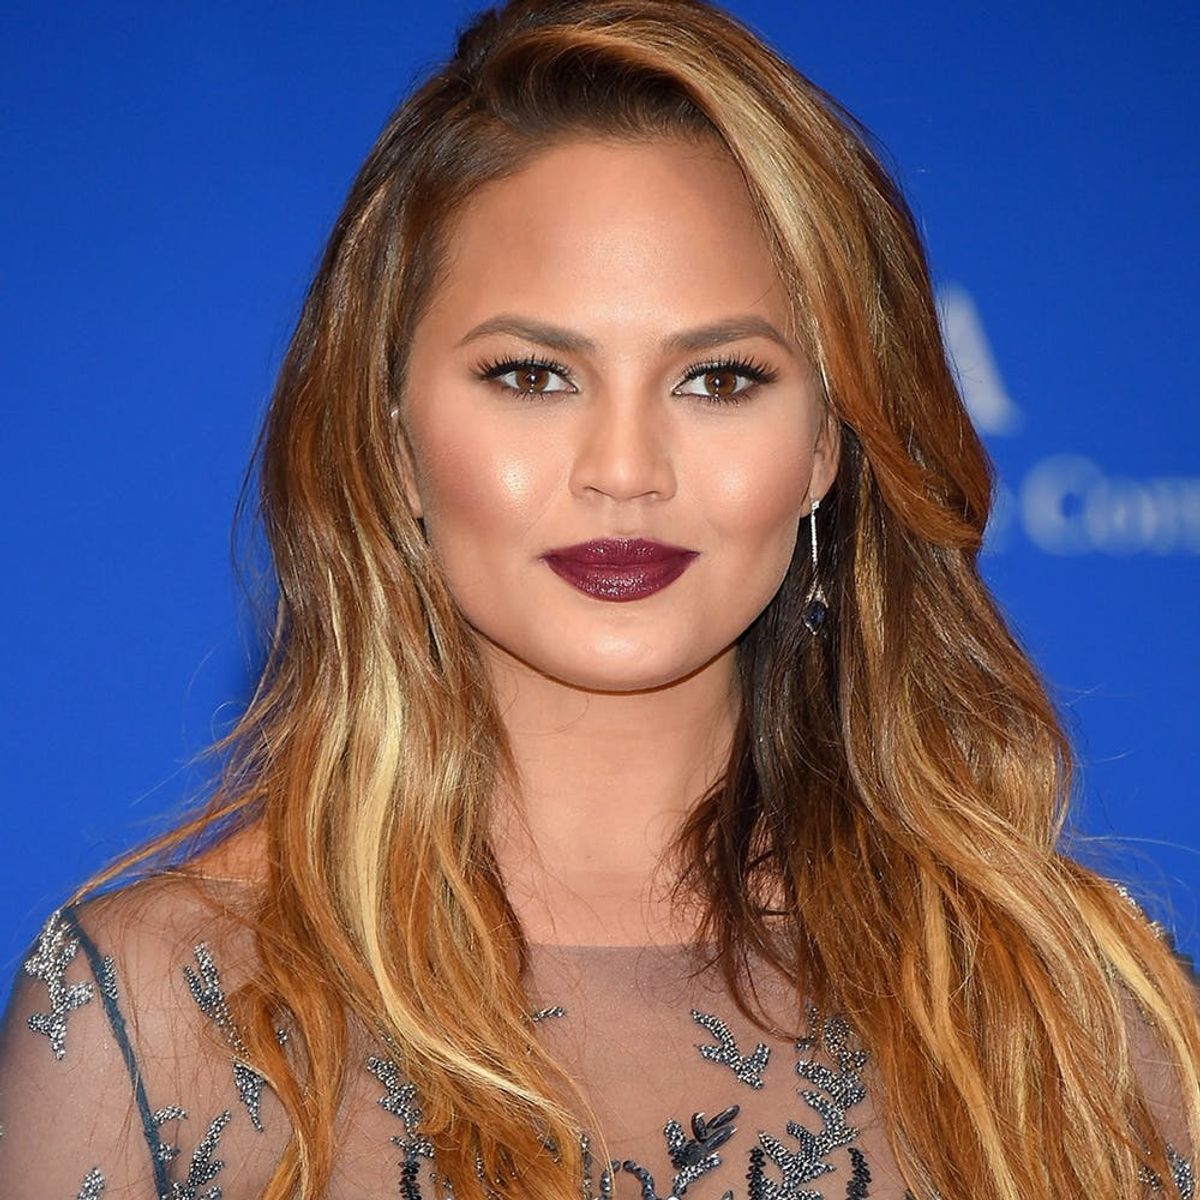 How Chrissy Teigen, Lena Dunham + More Are Standing Up to Body Shaming